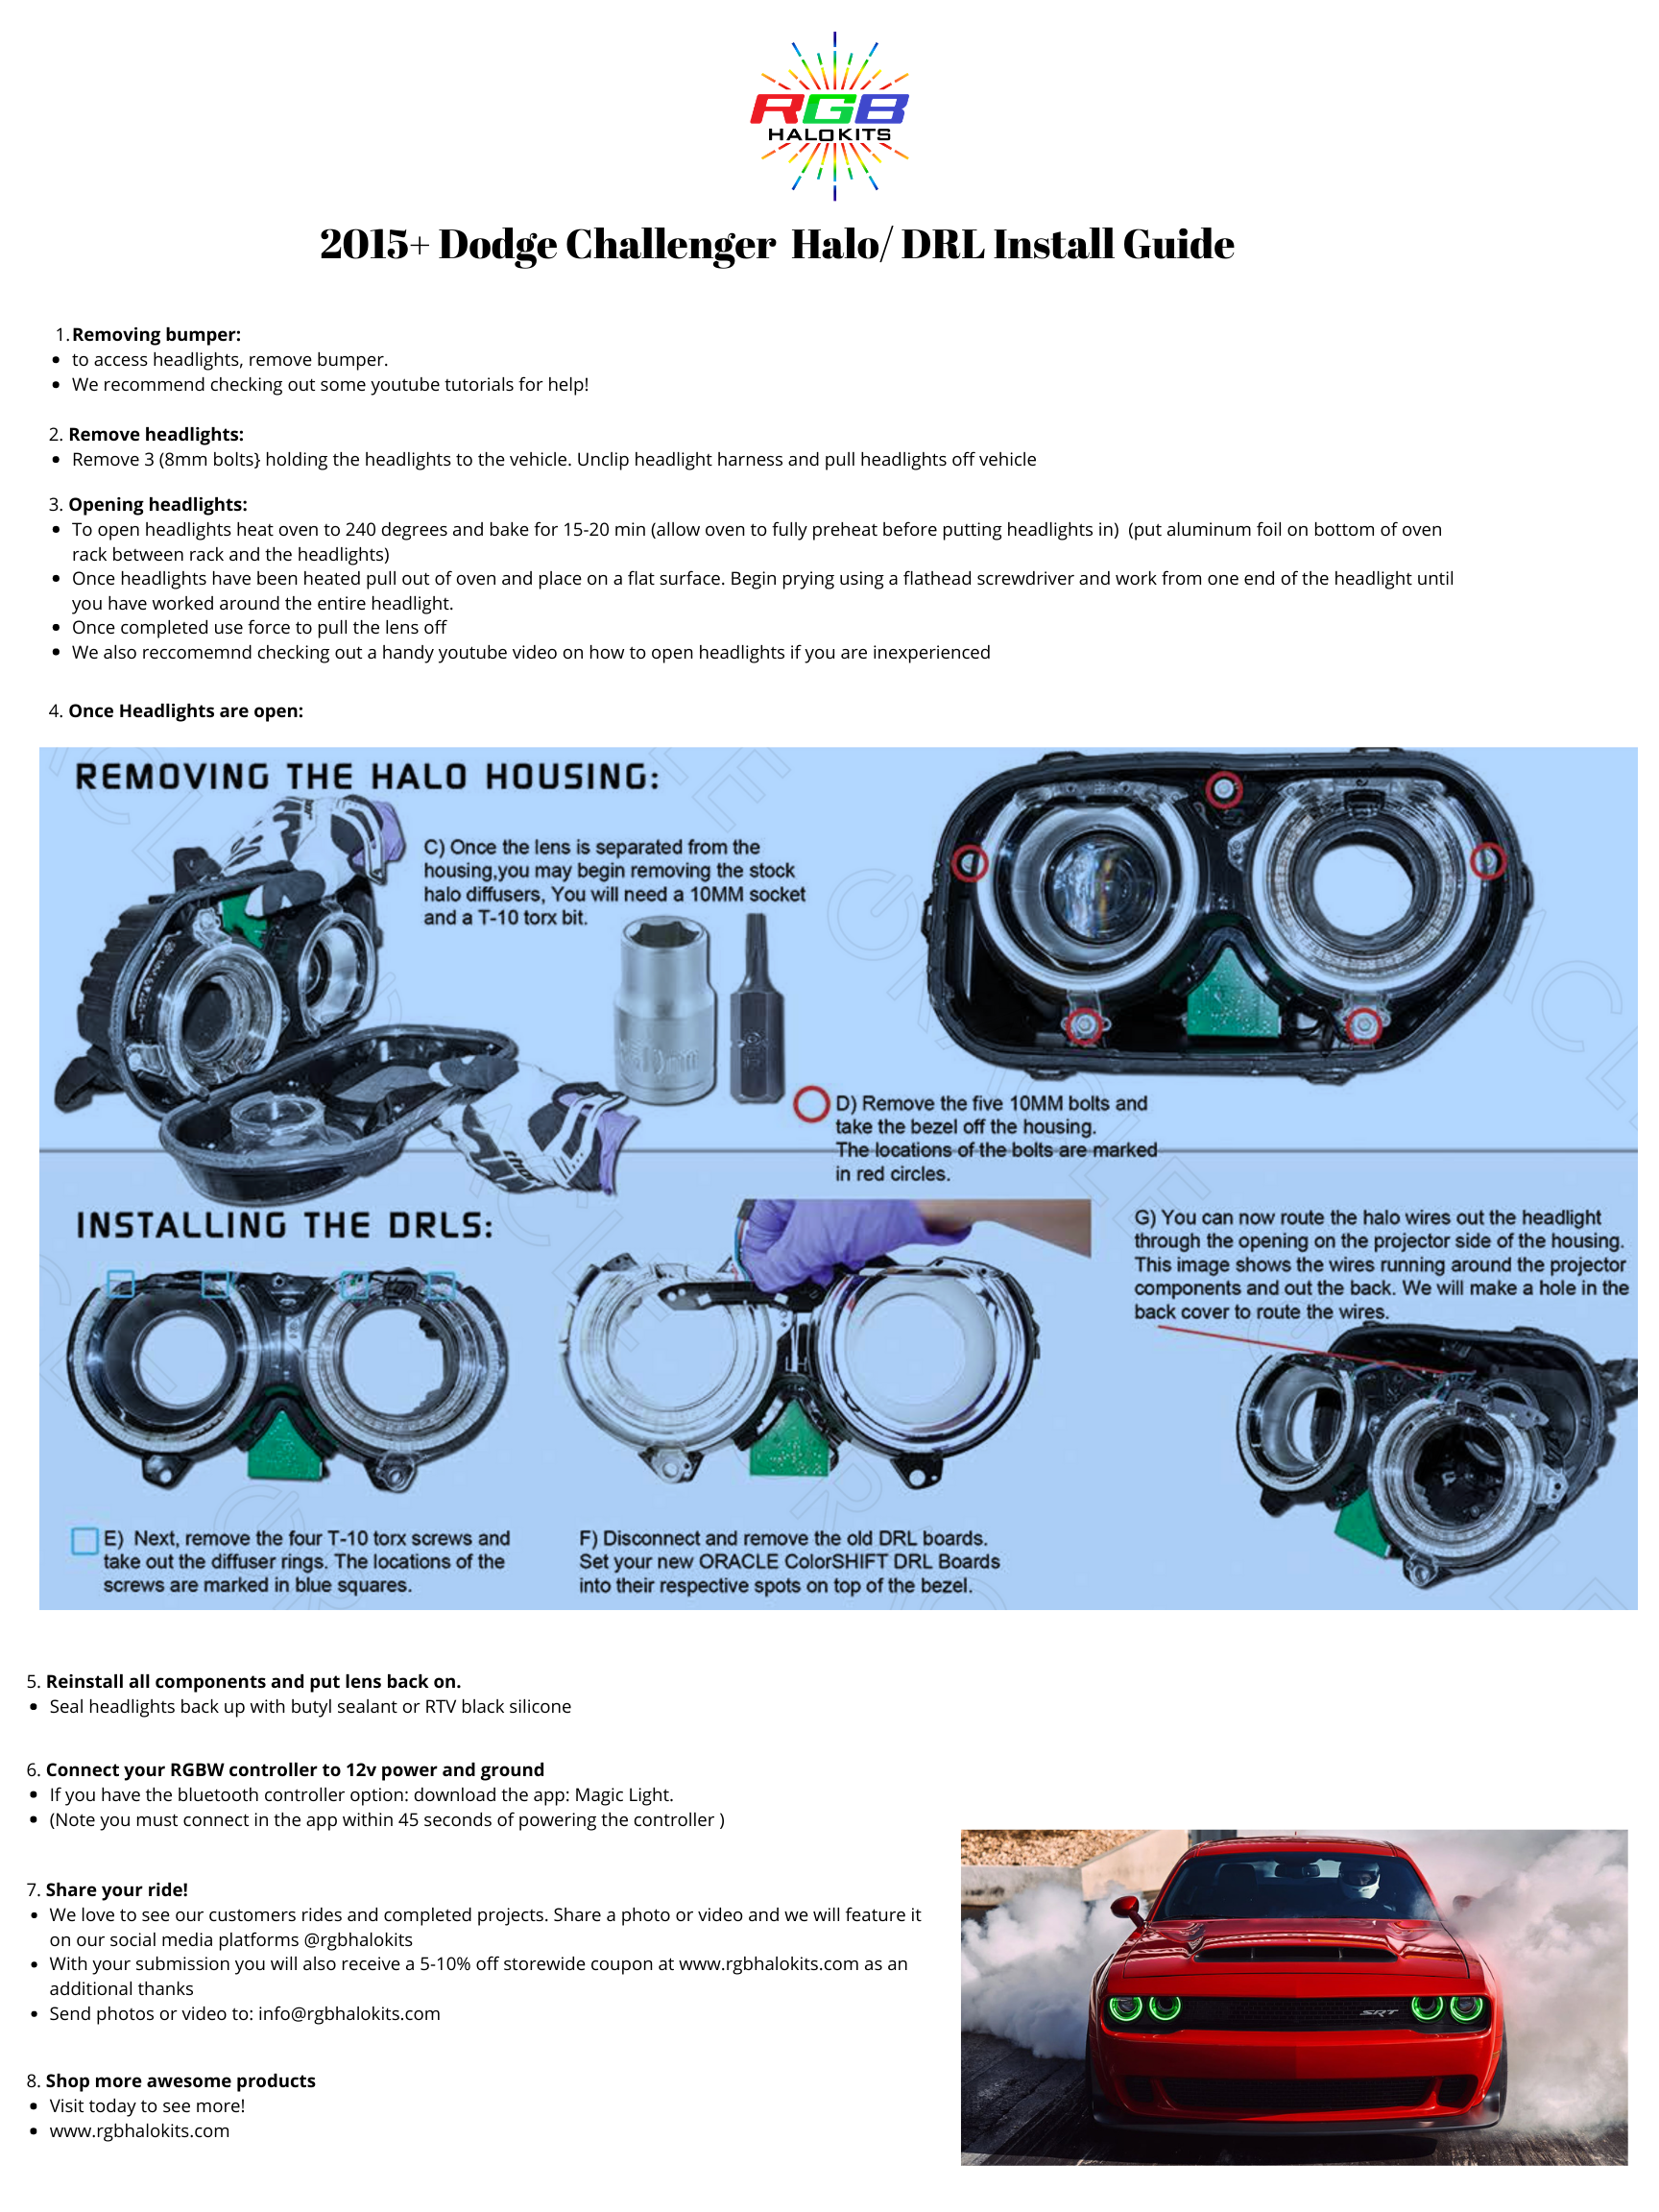 Copy_of_Copy_of_Copy_of_2015-2019_Dodge_Challenger_RGBW_DRL_Install_Guide.png